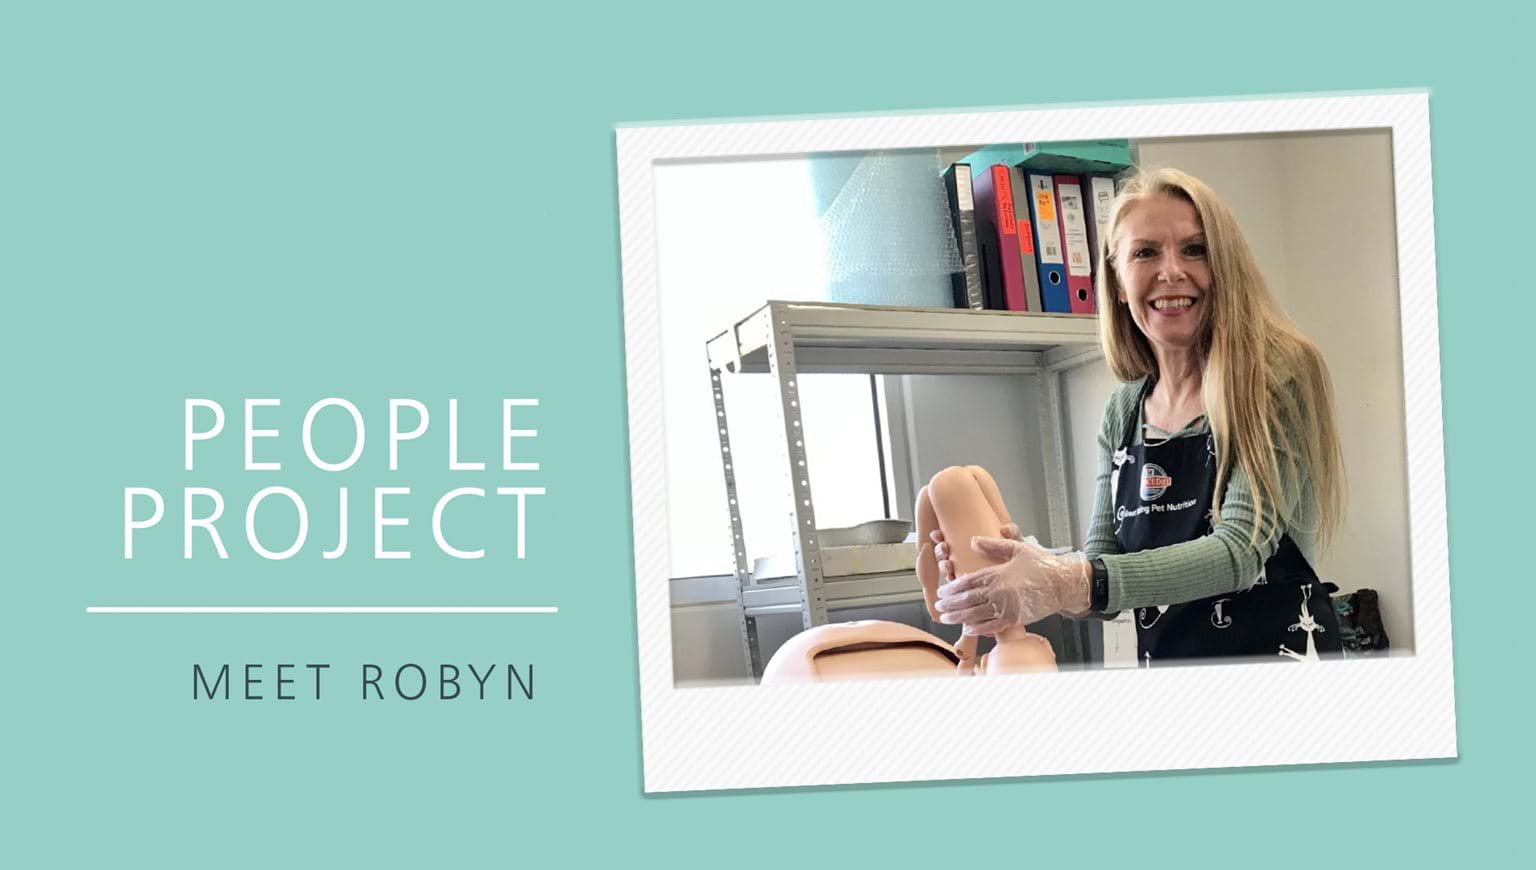 People Project - Meet Robyn